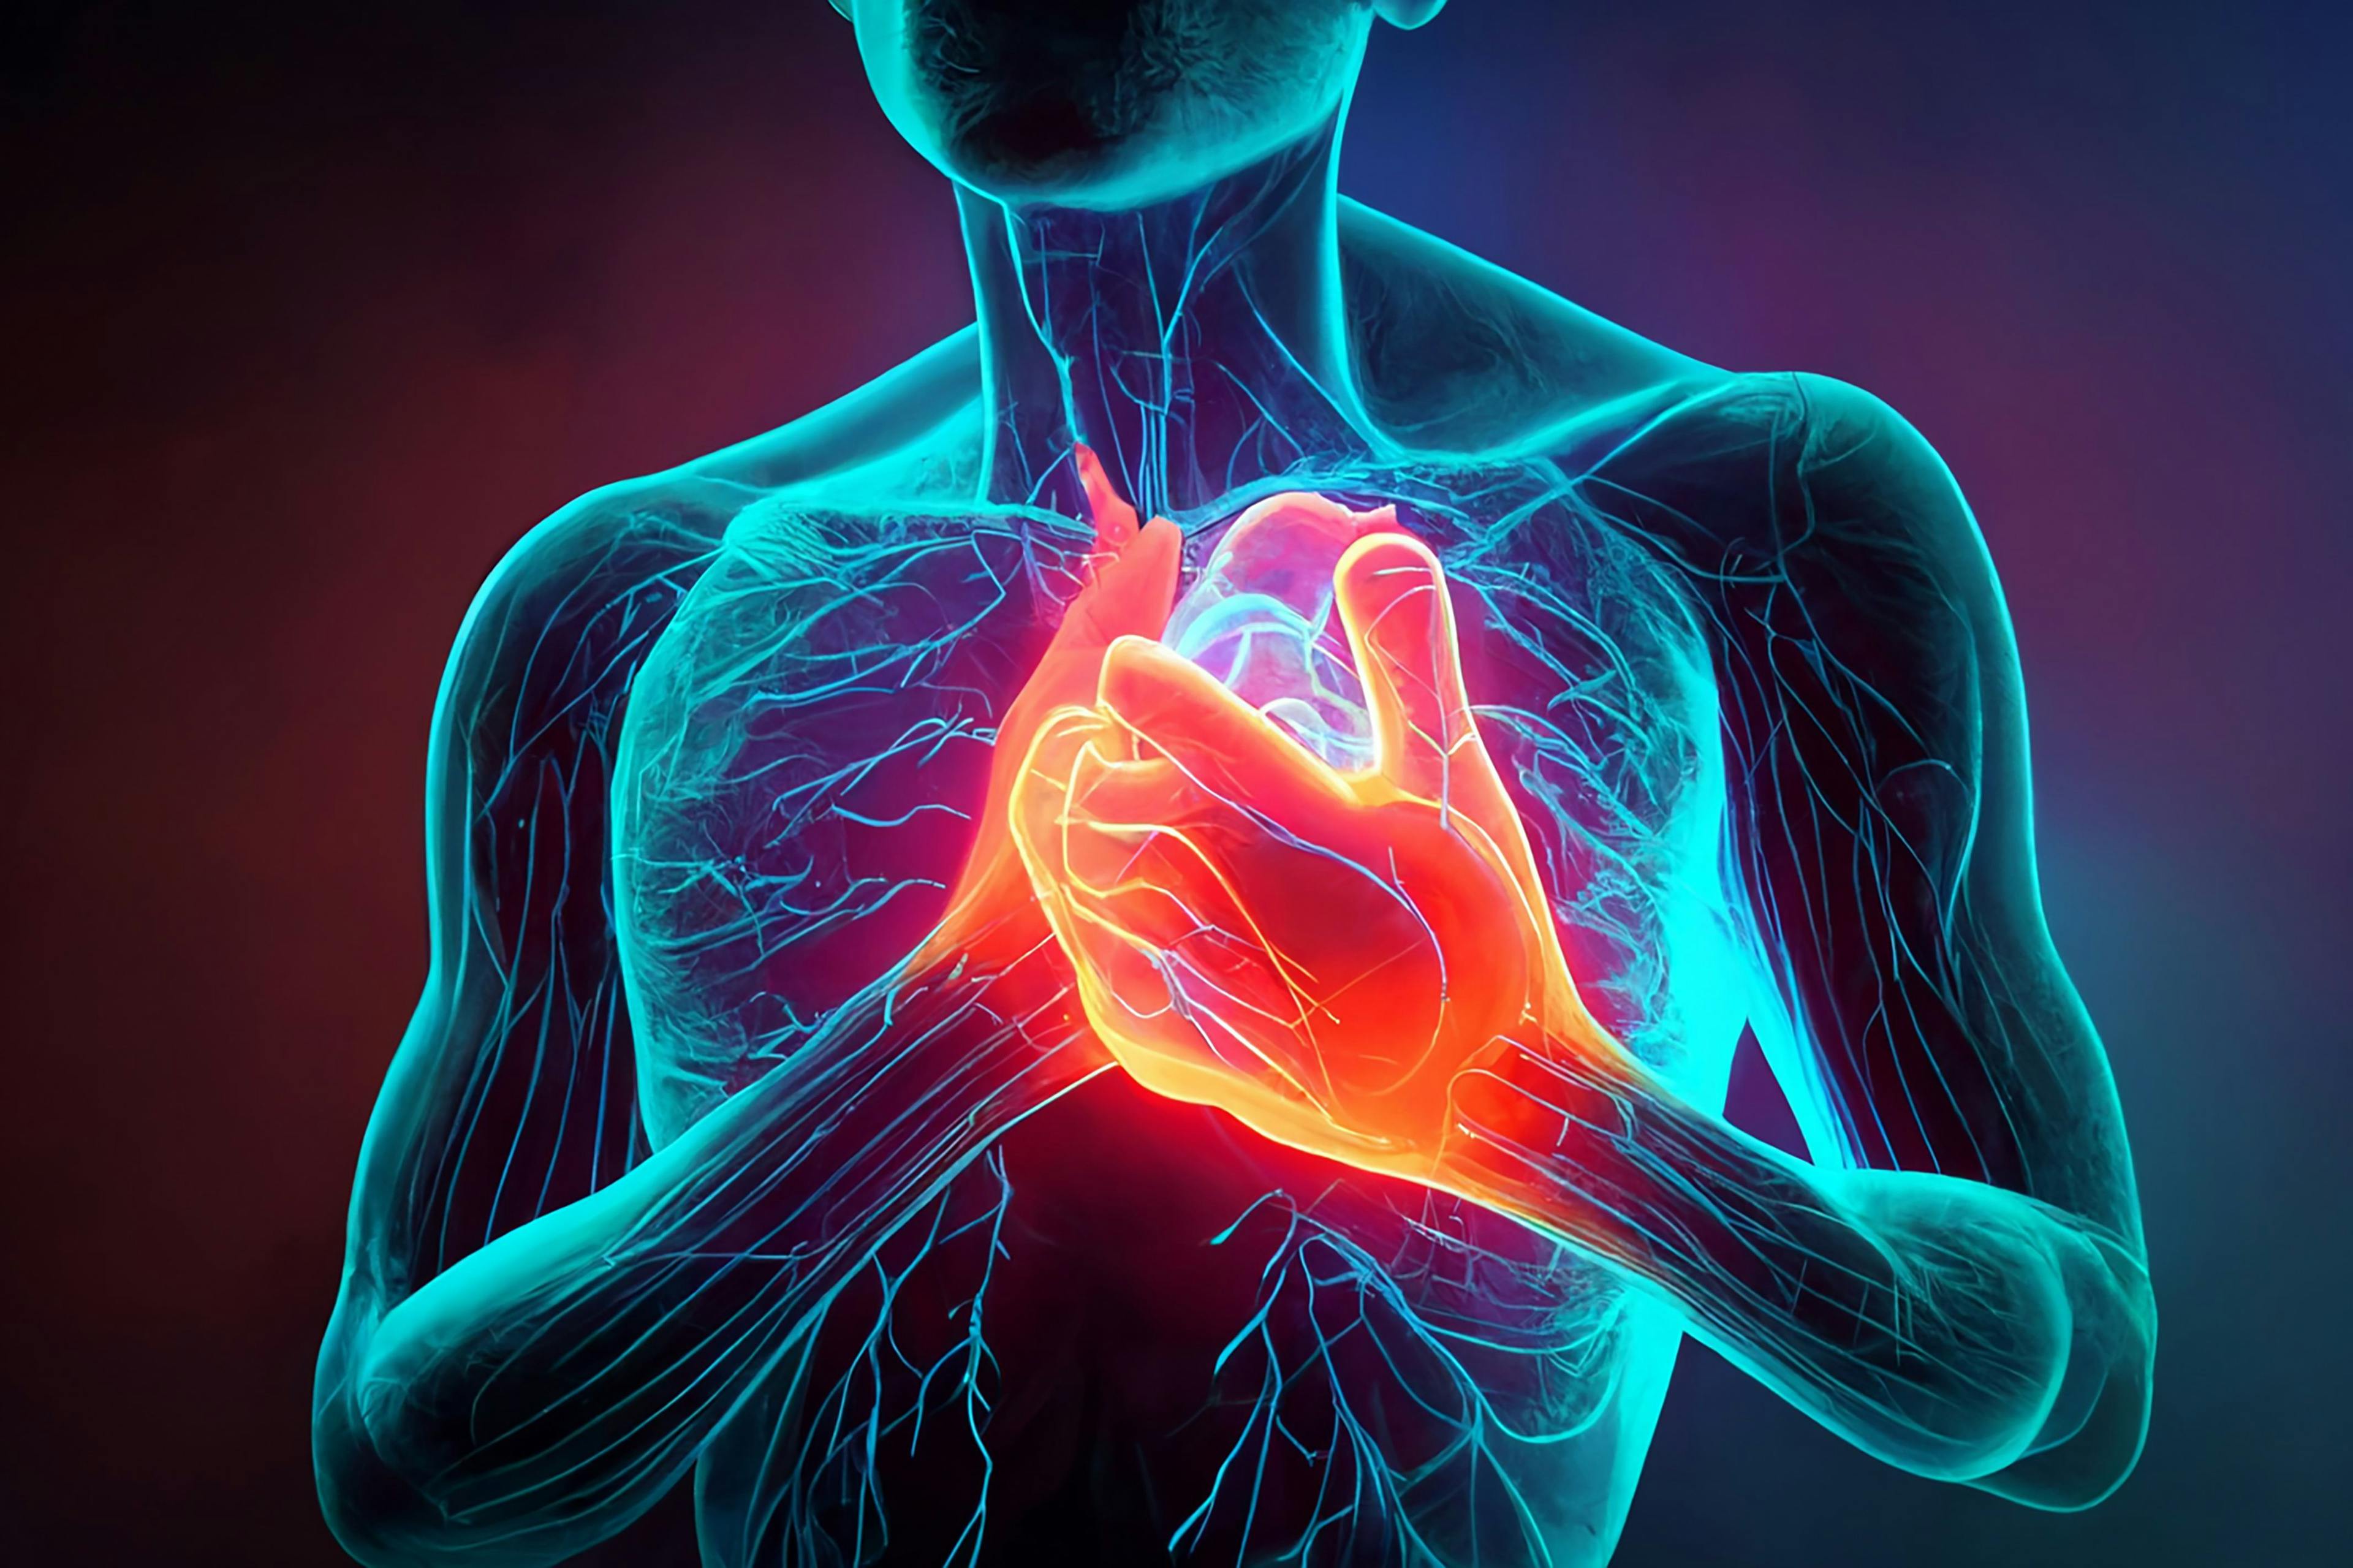  Pain in the heart, a person is holding on to the heart in his chest | Image credit: Vadi Fuoco- stock.adobe.com 